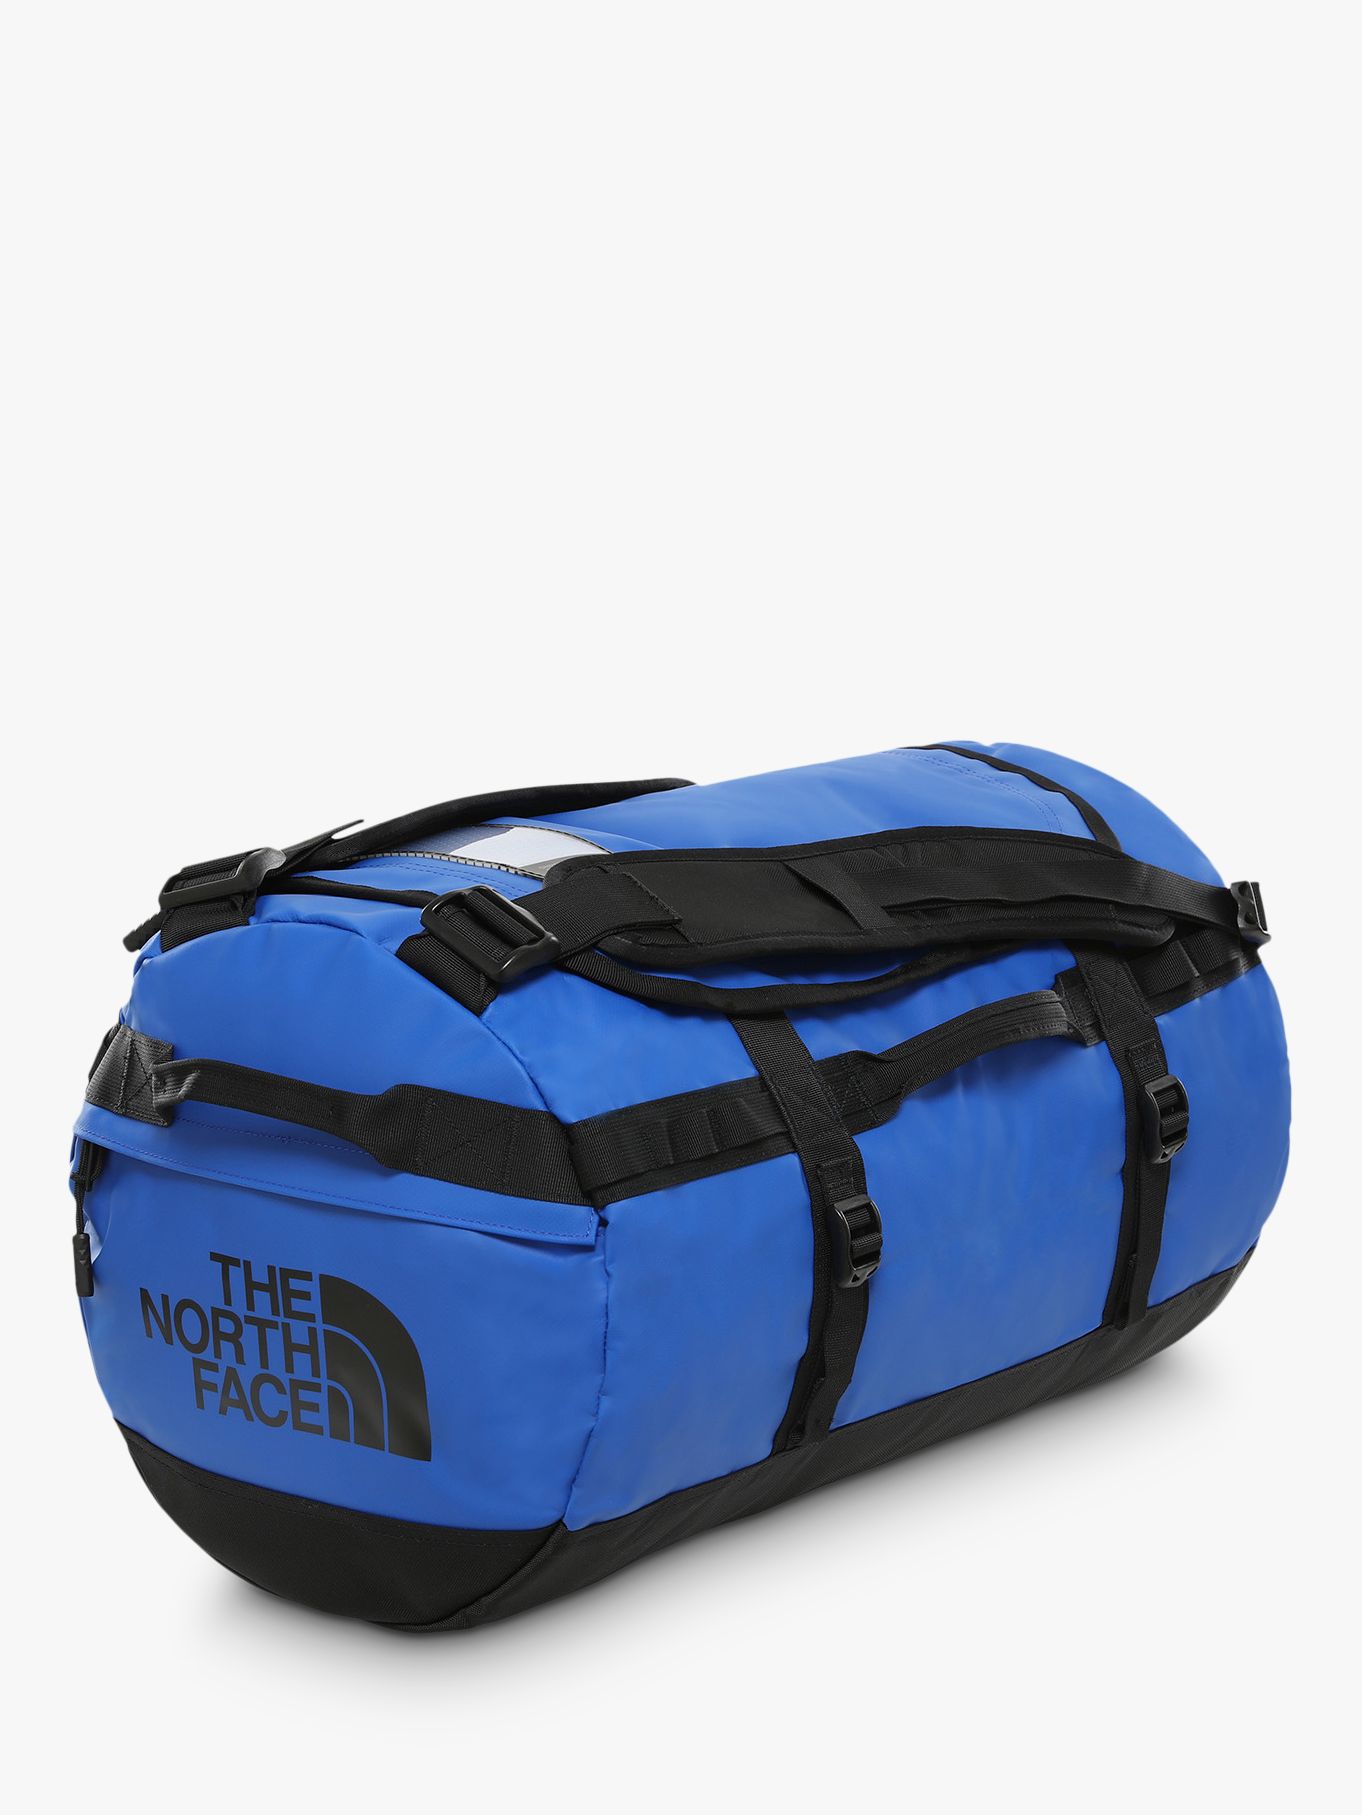 the north face duffle bags